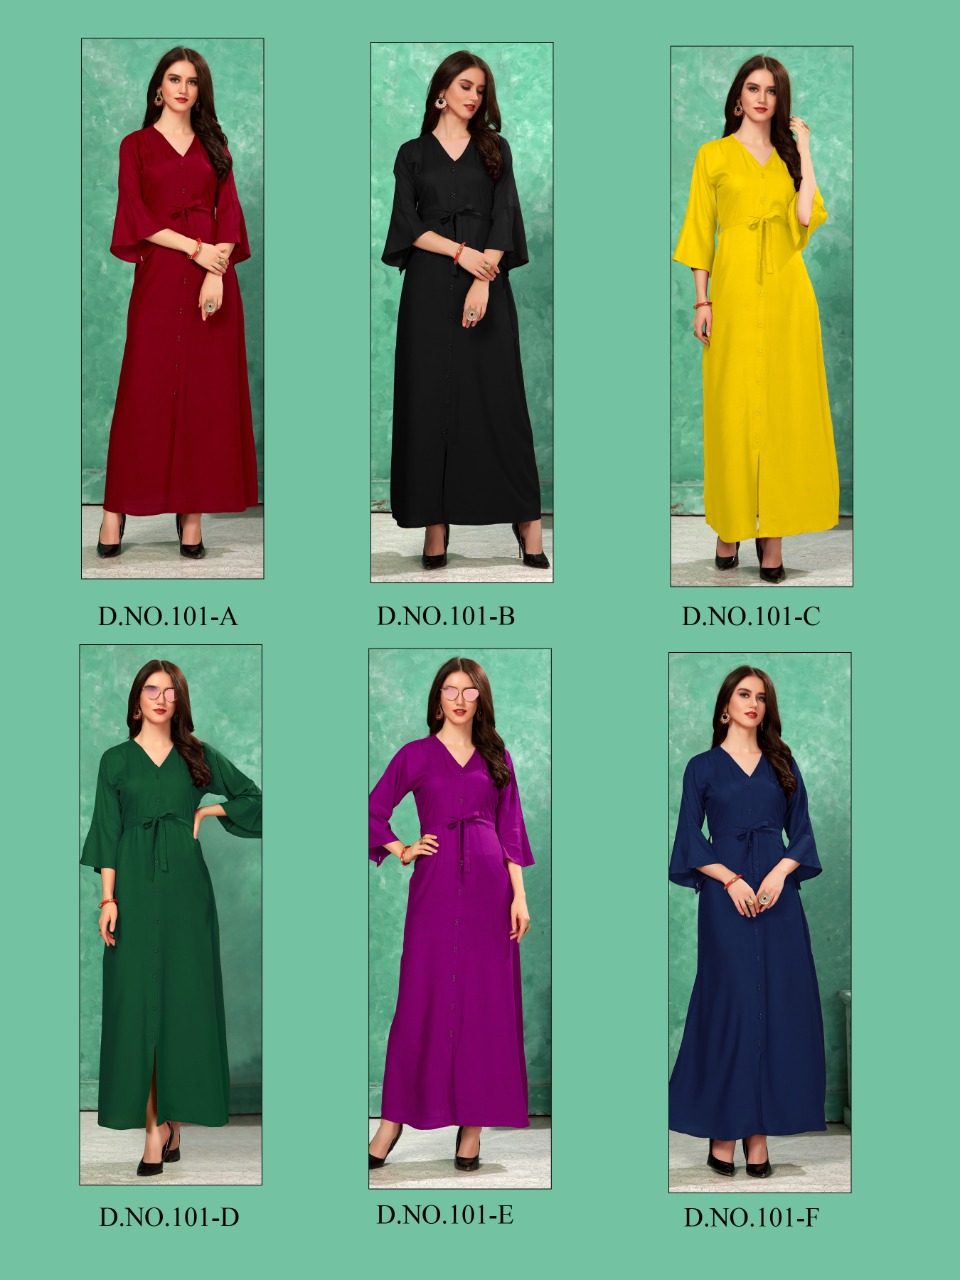 Vee Fab india colorbar vol-2 a new and stylish trendy look Gowns